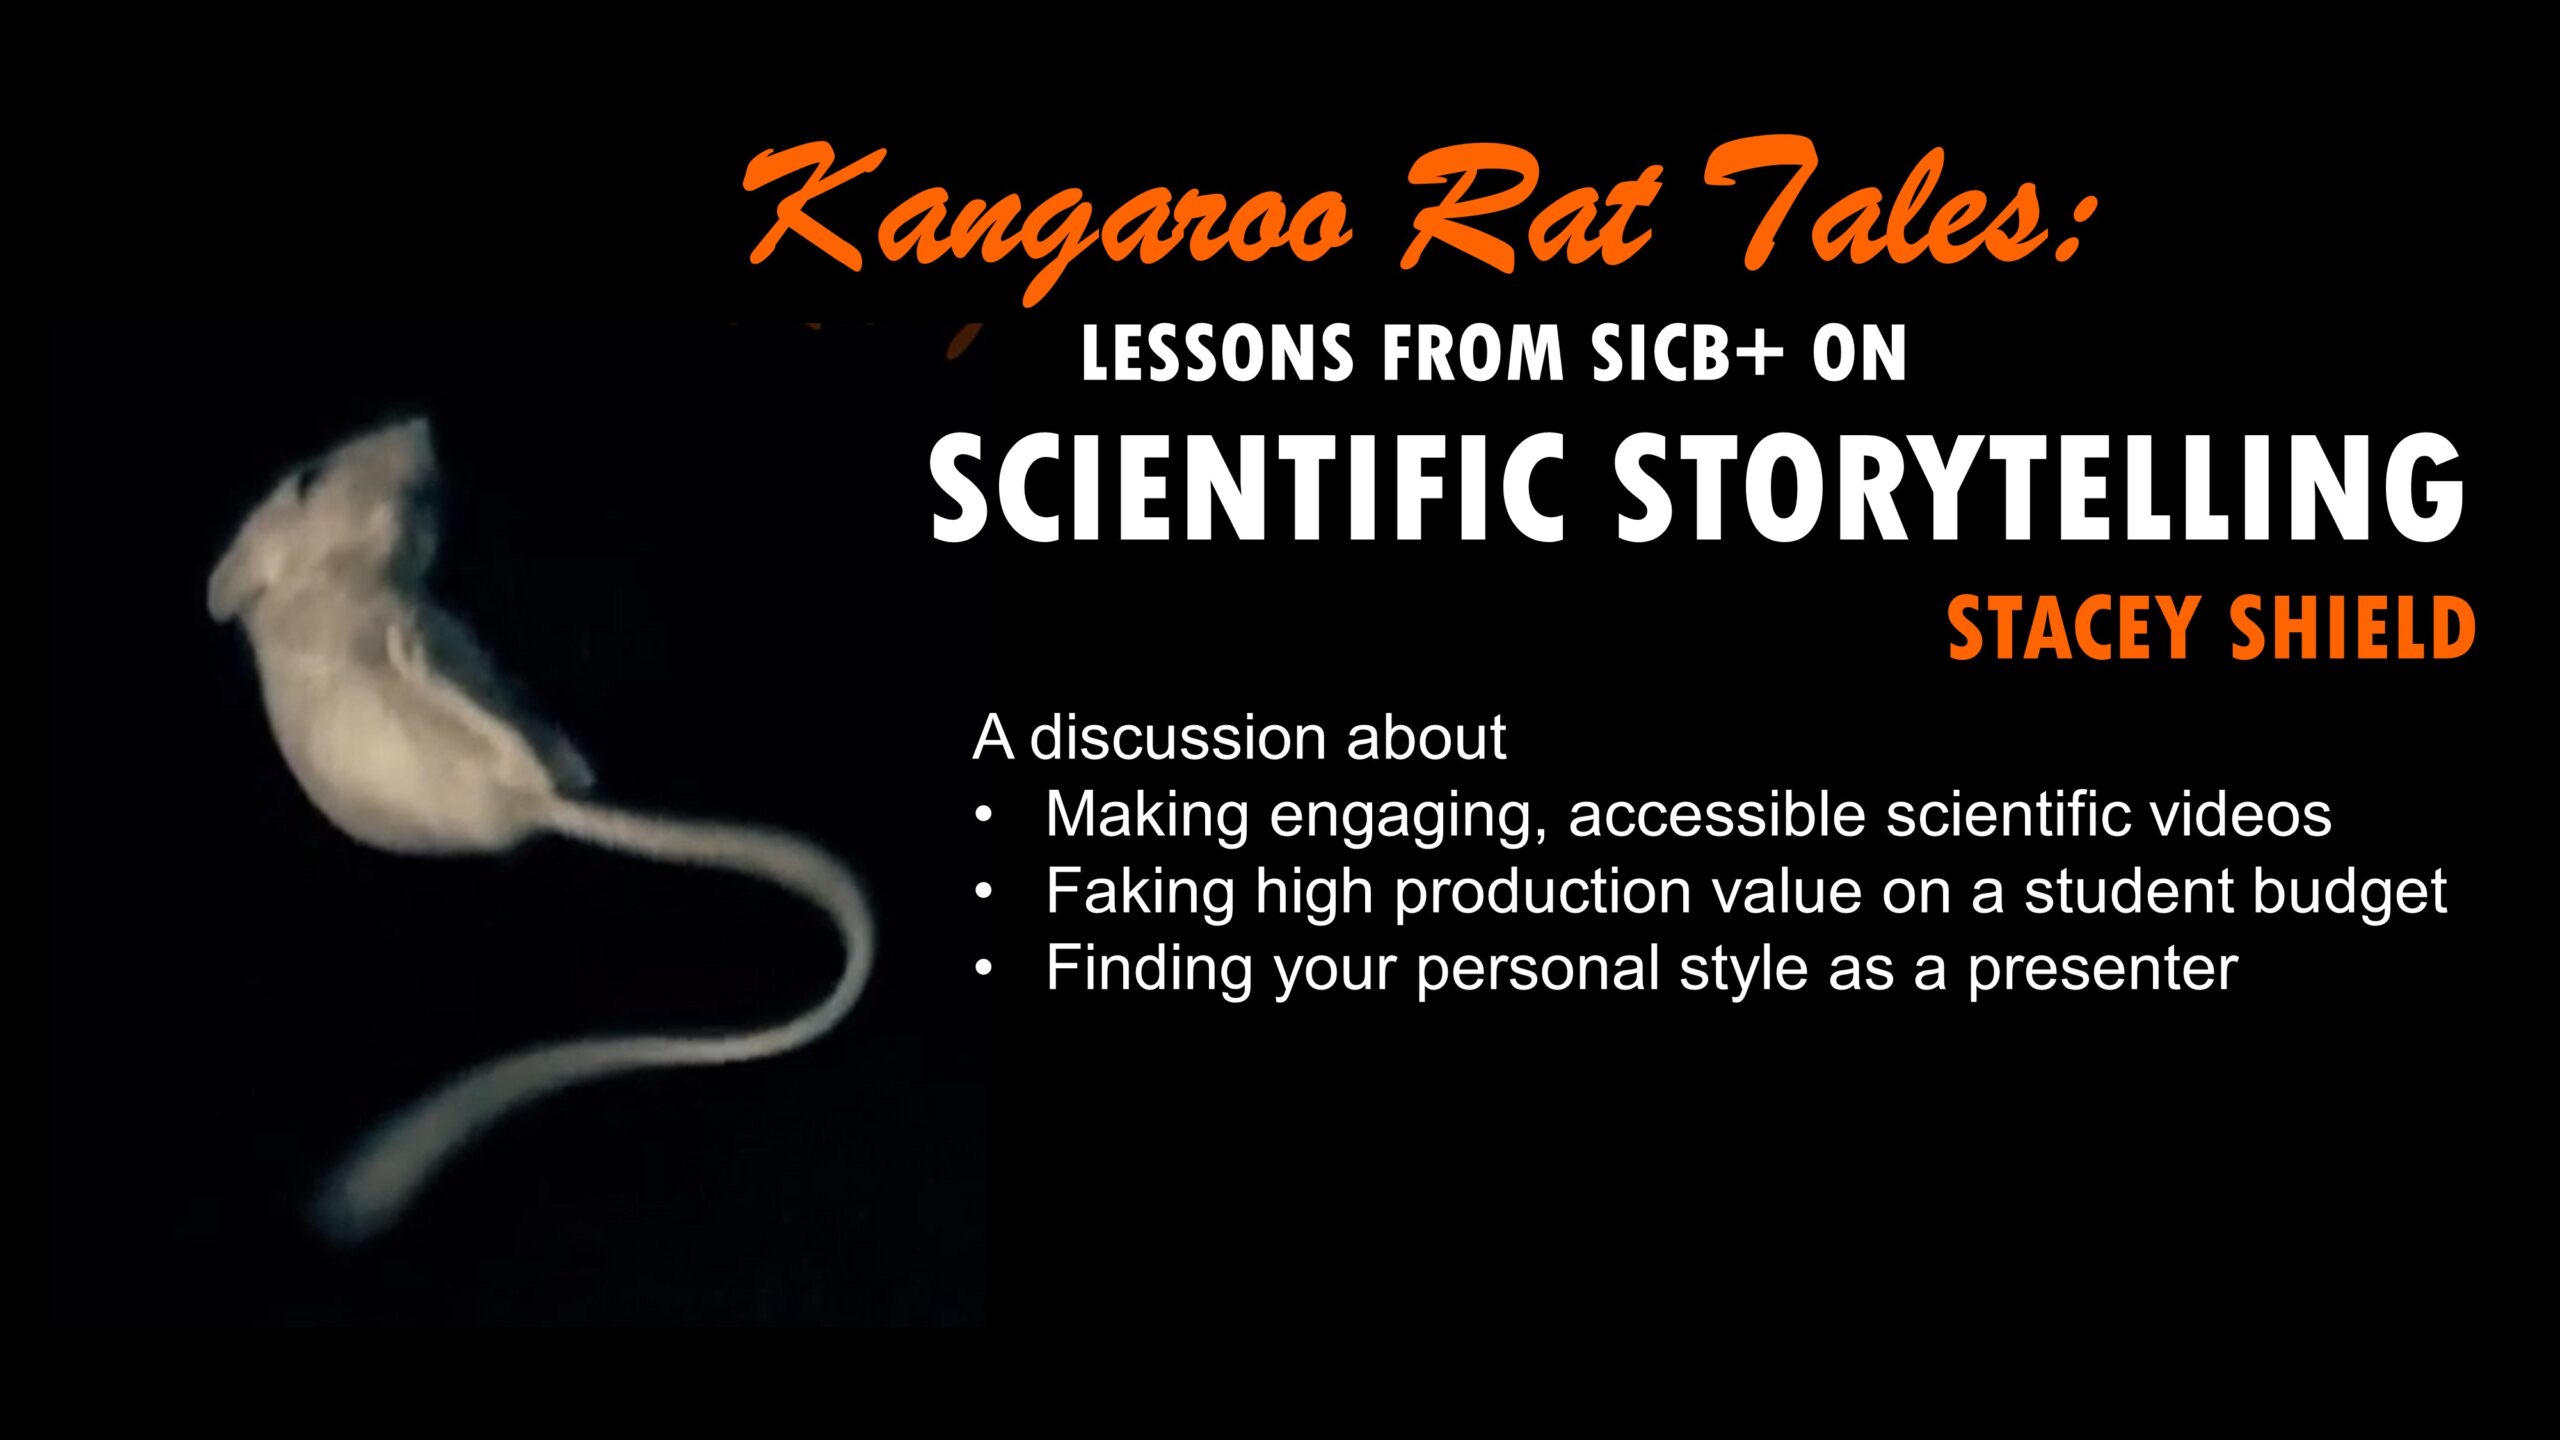 Flyer for Stacey Shield's talk: Kangaroo Rat Tales: lessons from SICB on Scientific Storytelling. Includes an image of a kangaroo rat mid-leap. 